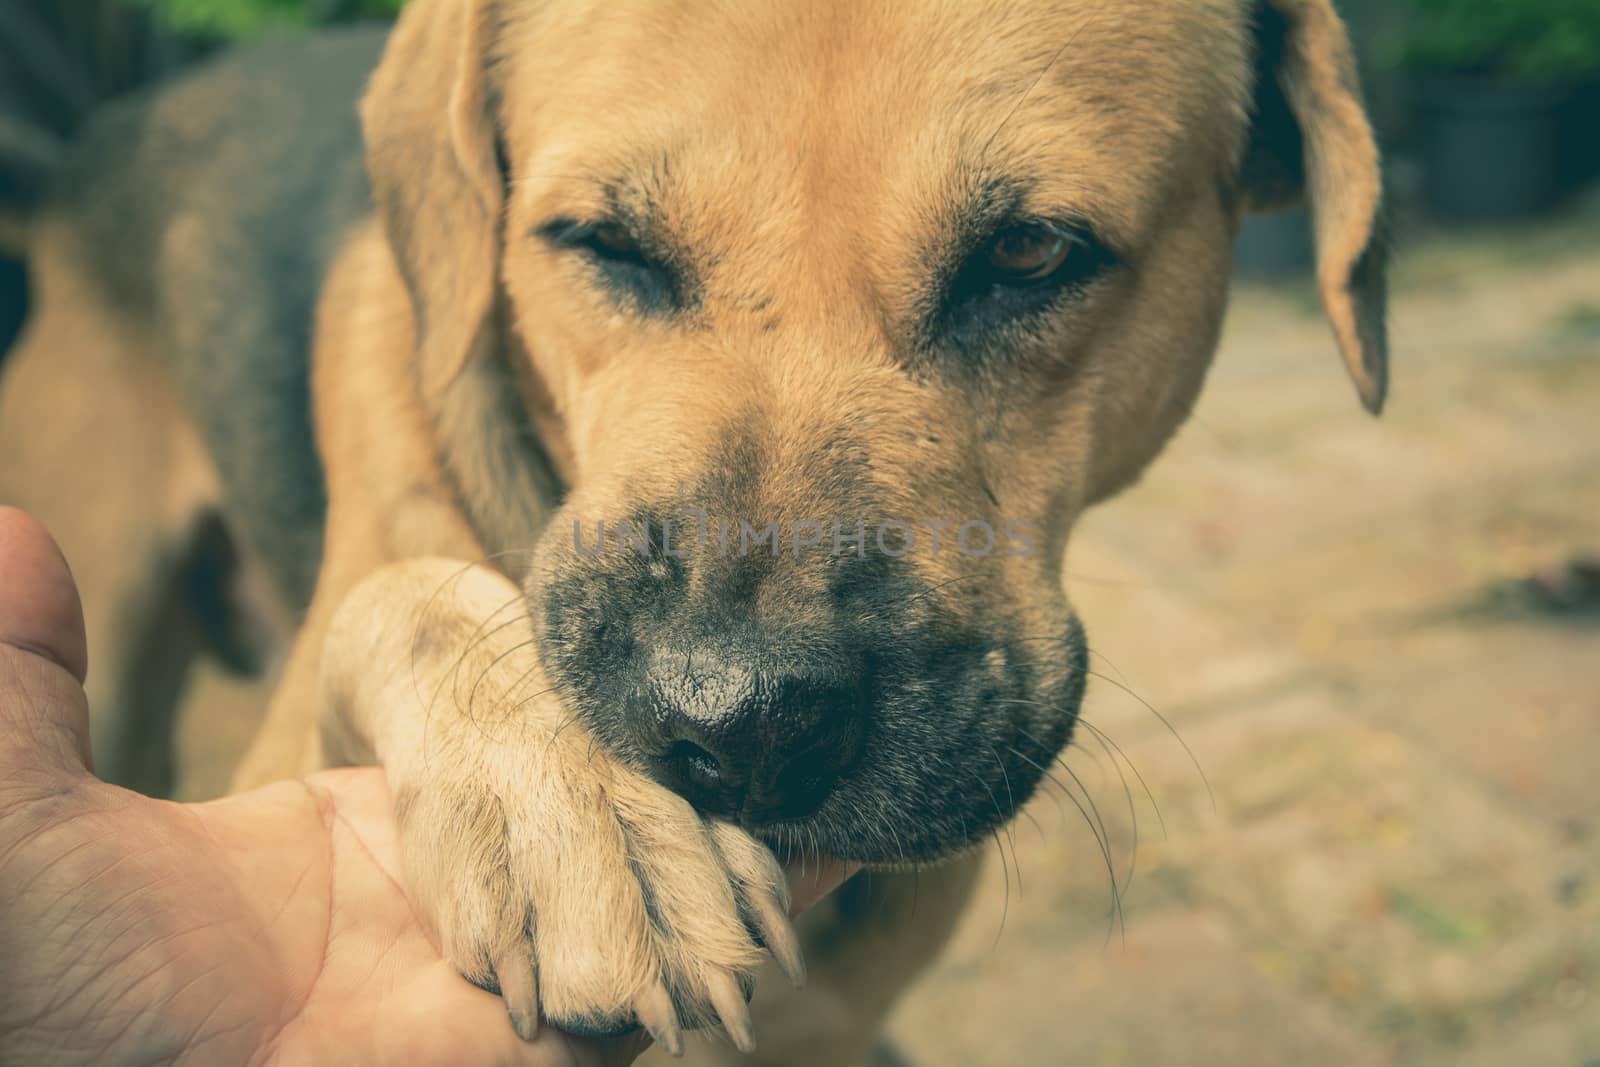 dogs shaking hand with human, friendship between human and dogs. Dog paw and human hand shaking.